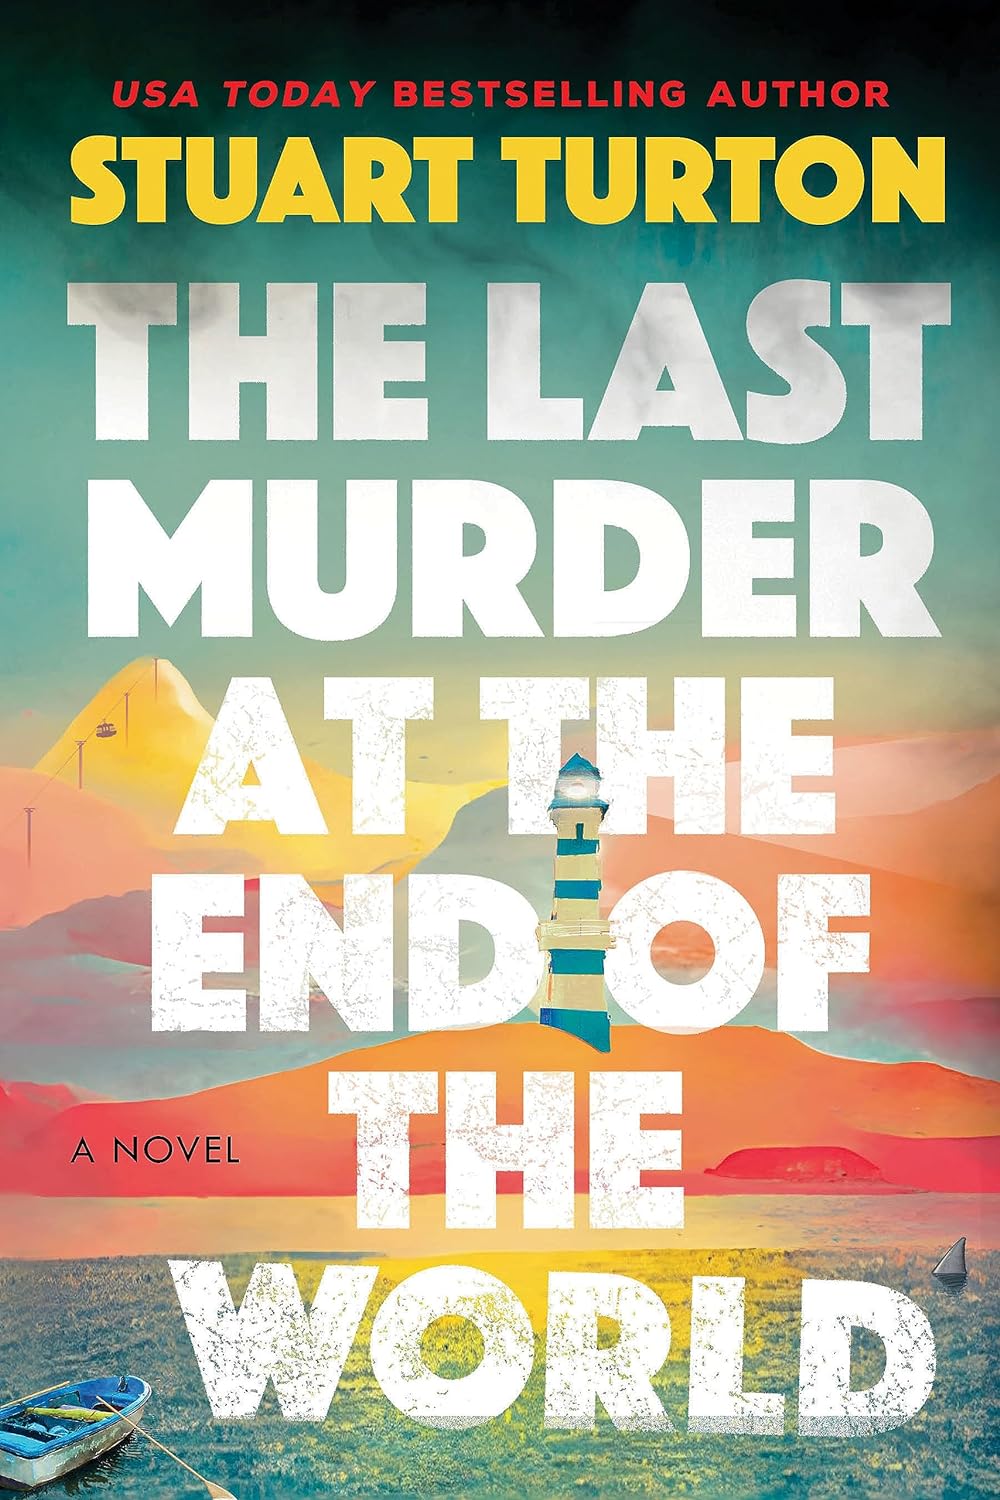 image for "The Last Murder at the End of the World"